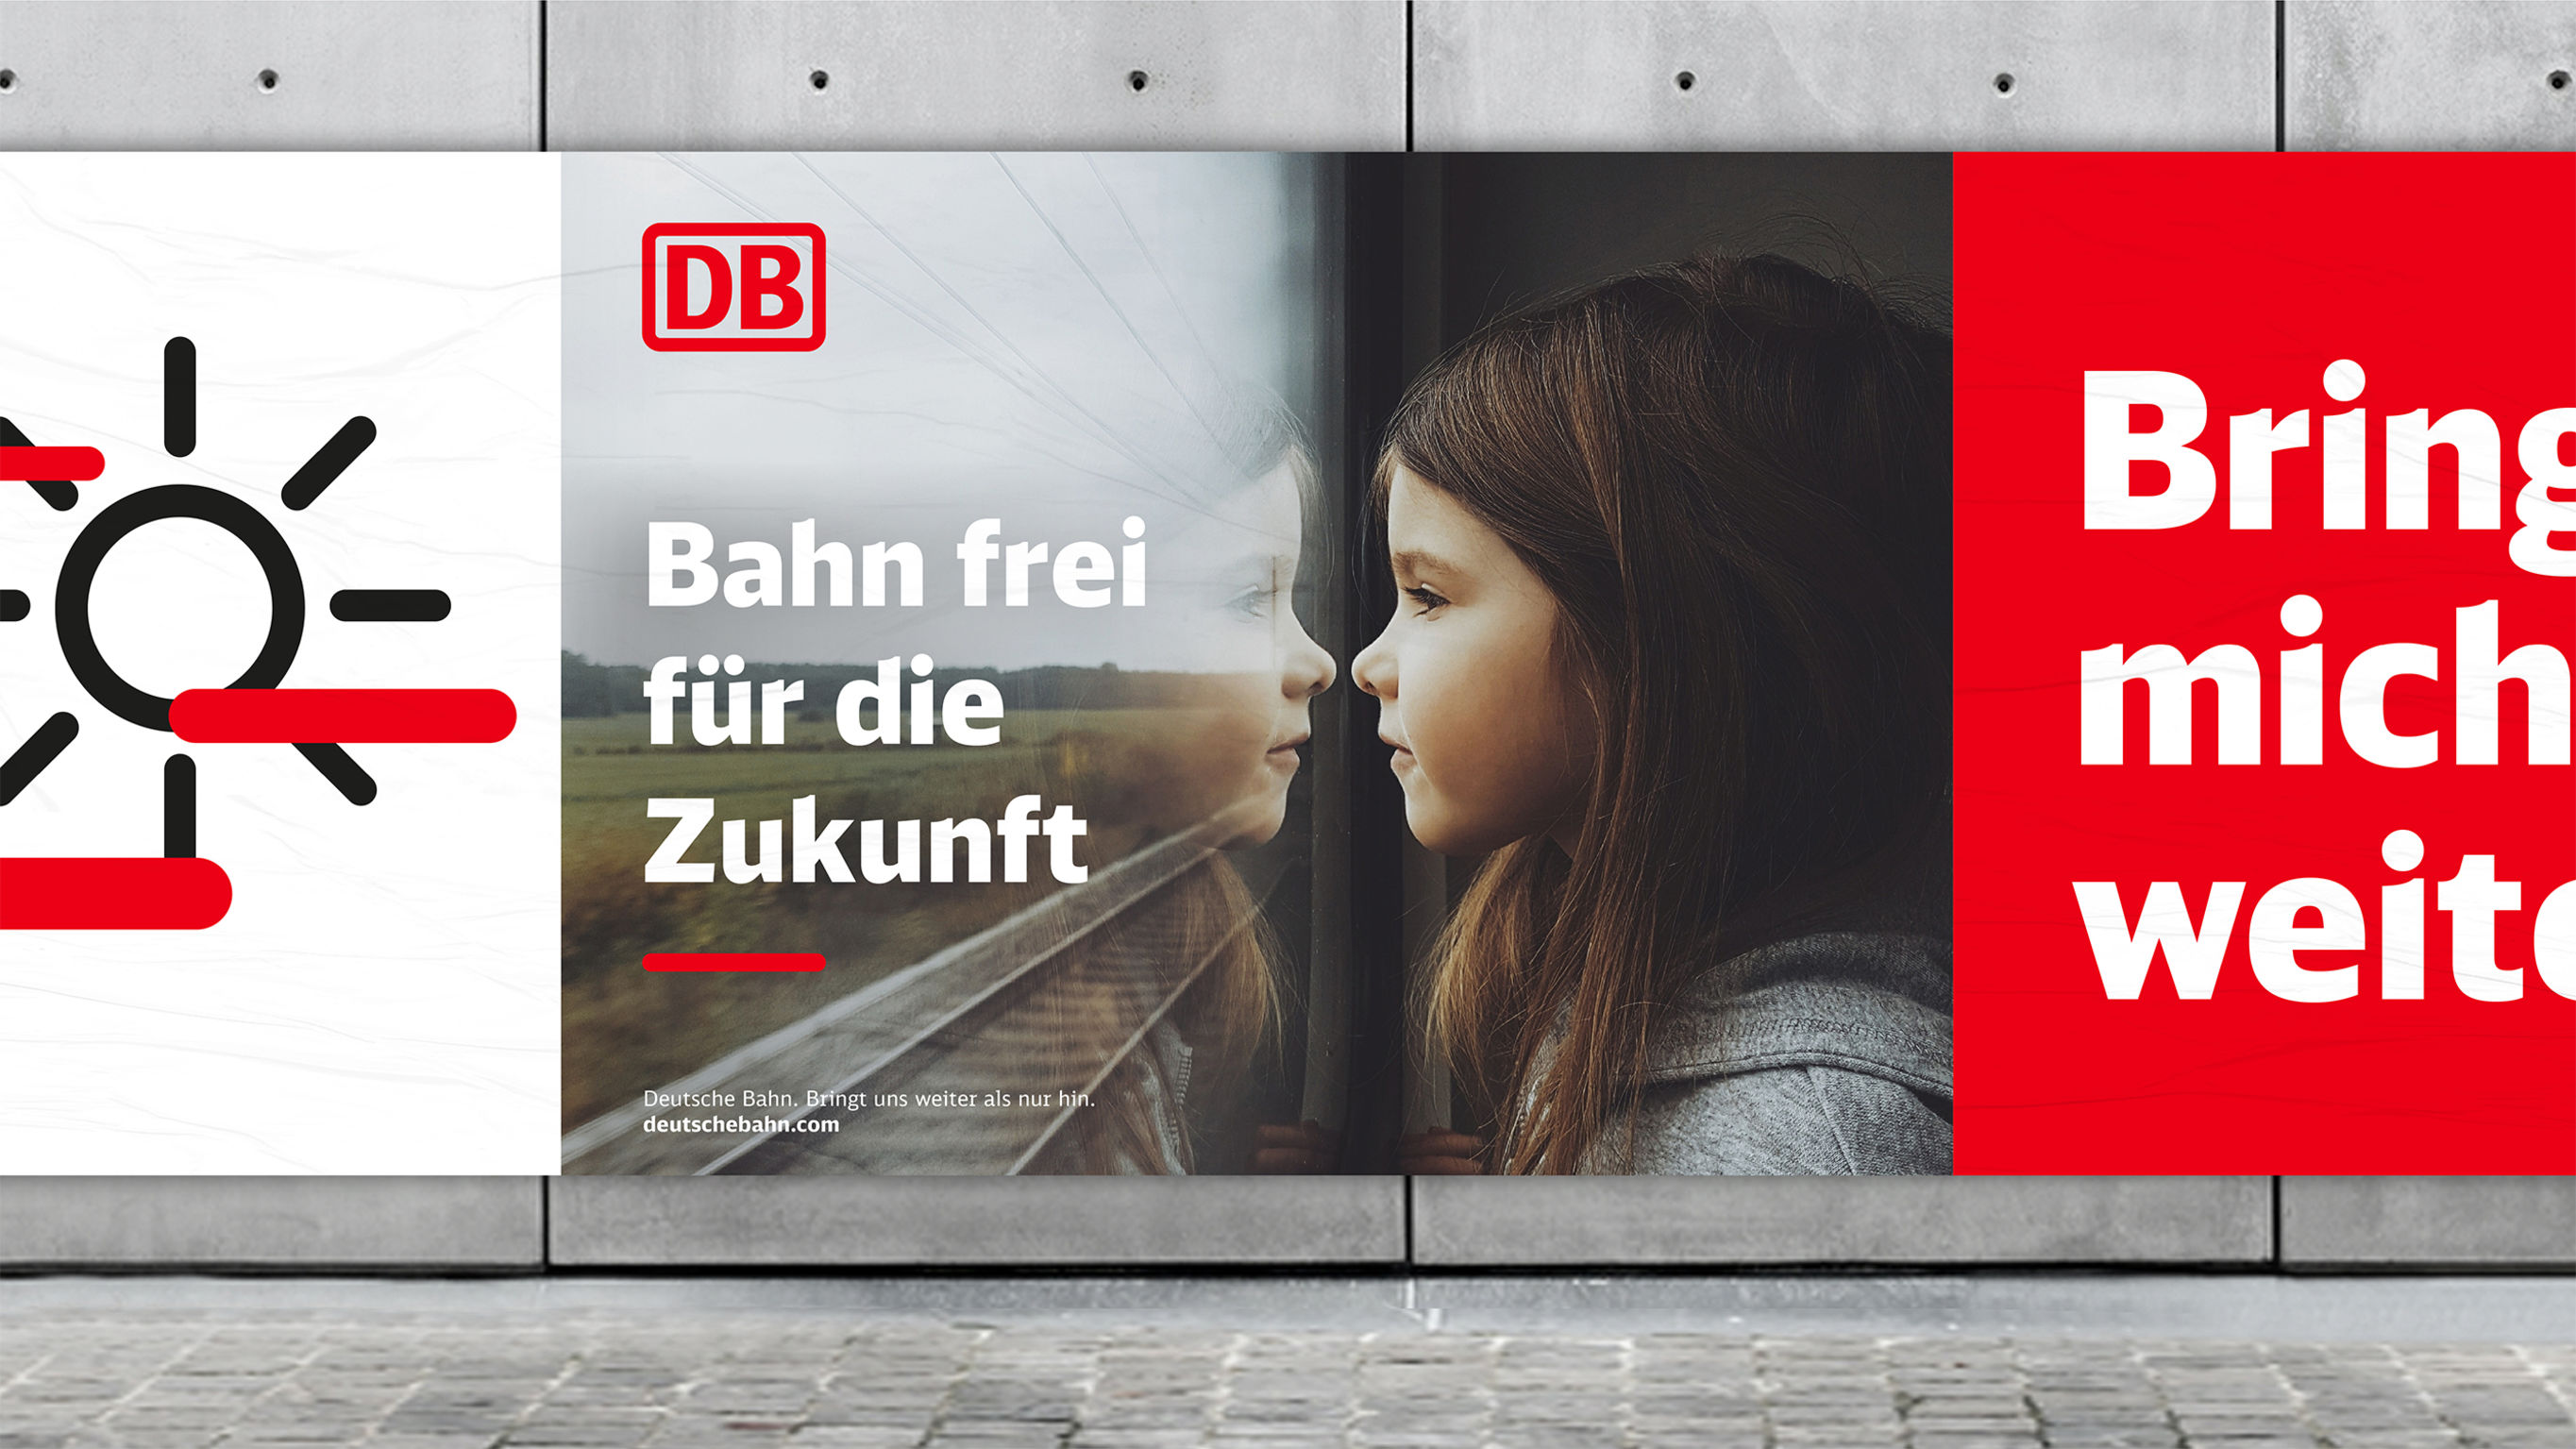 Deutsche Bahn: The Pulse that keeps Germany moving.